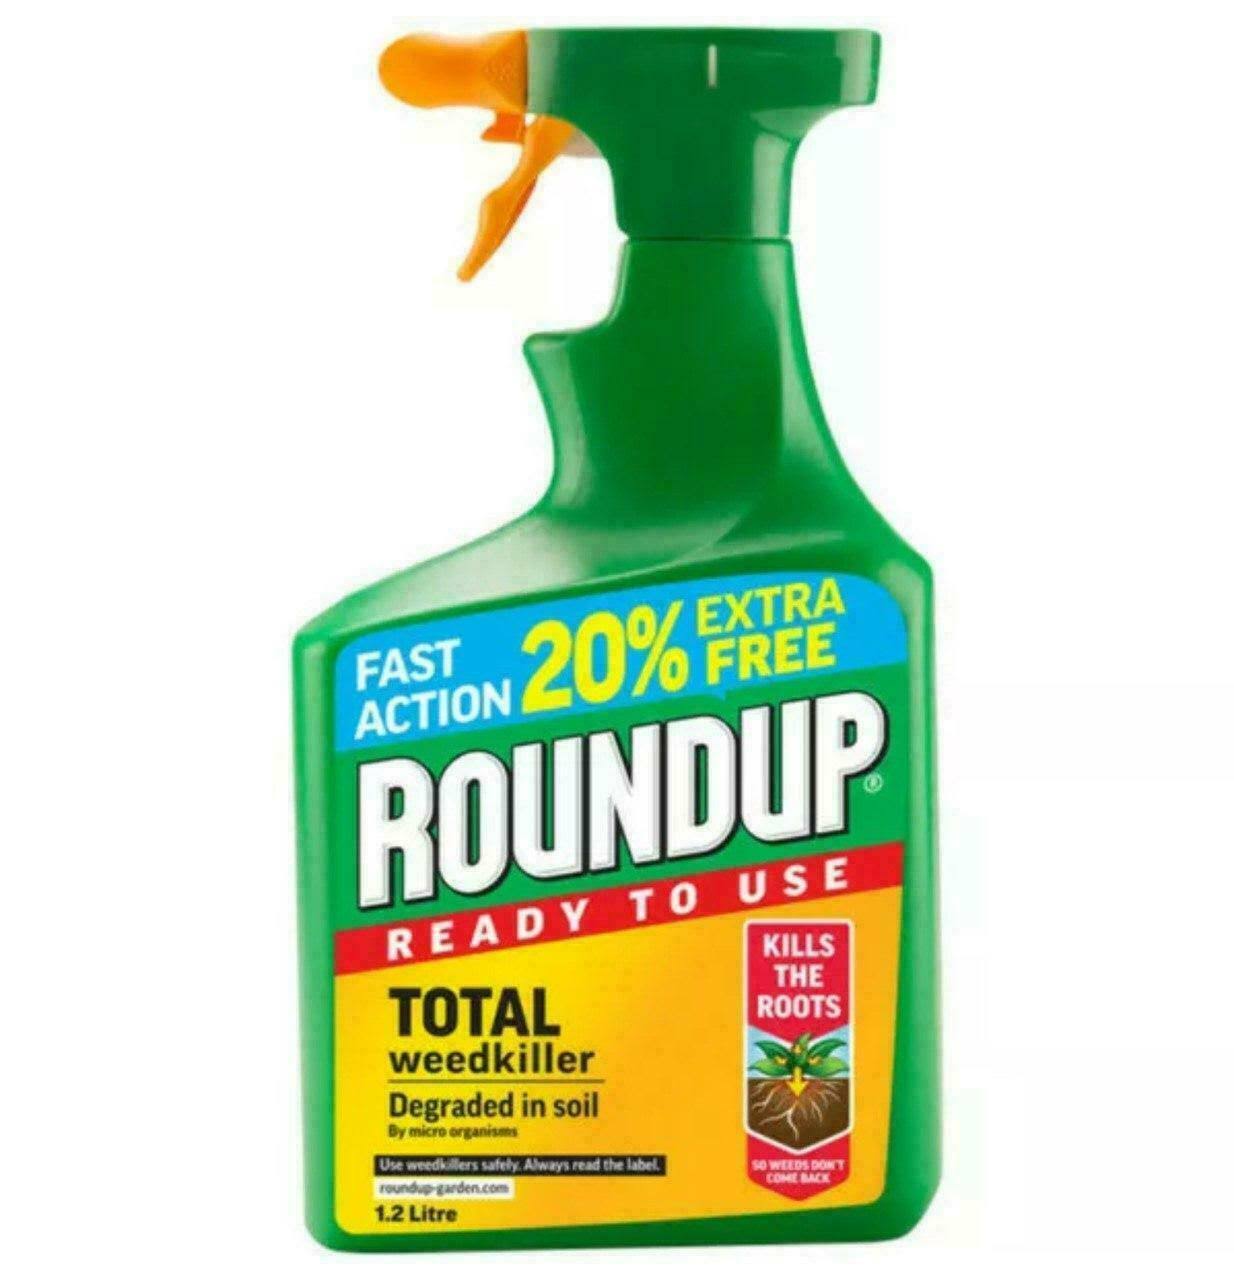 Roundup Ready to Use Total Weedkiller - 1.2 Liters